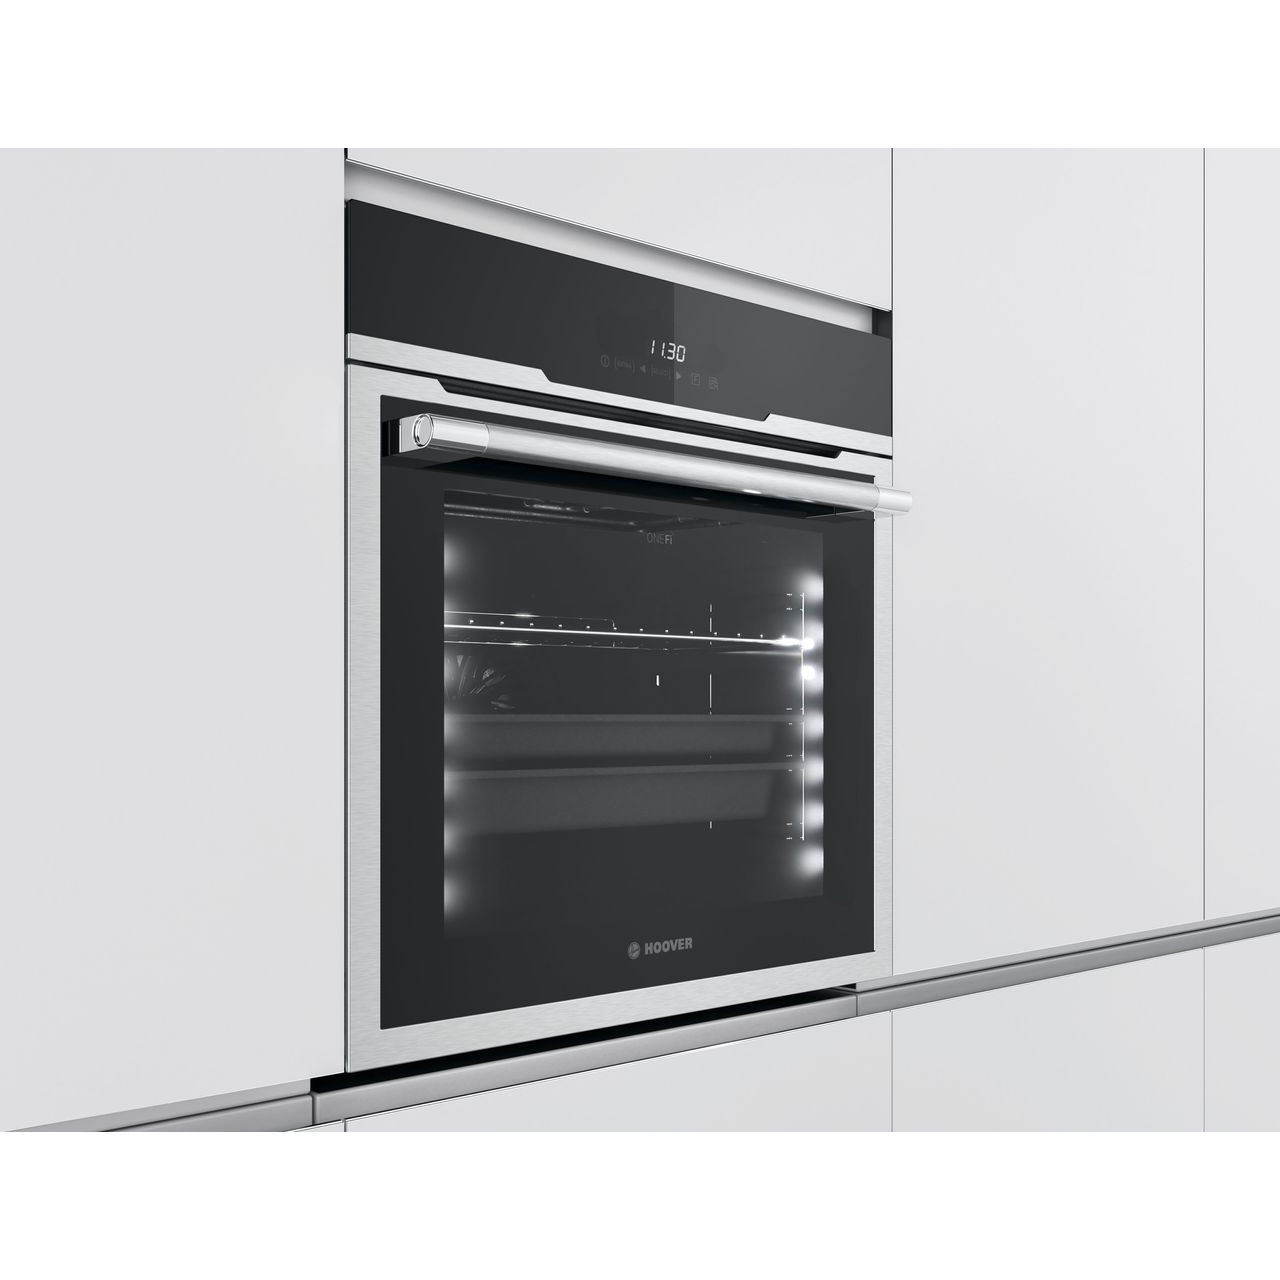 Hoover Electric Single Ovens in Stainless Steel